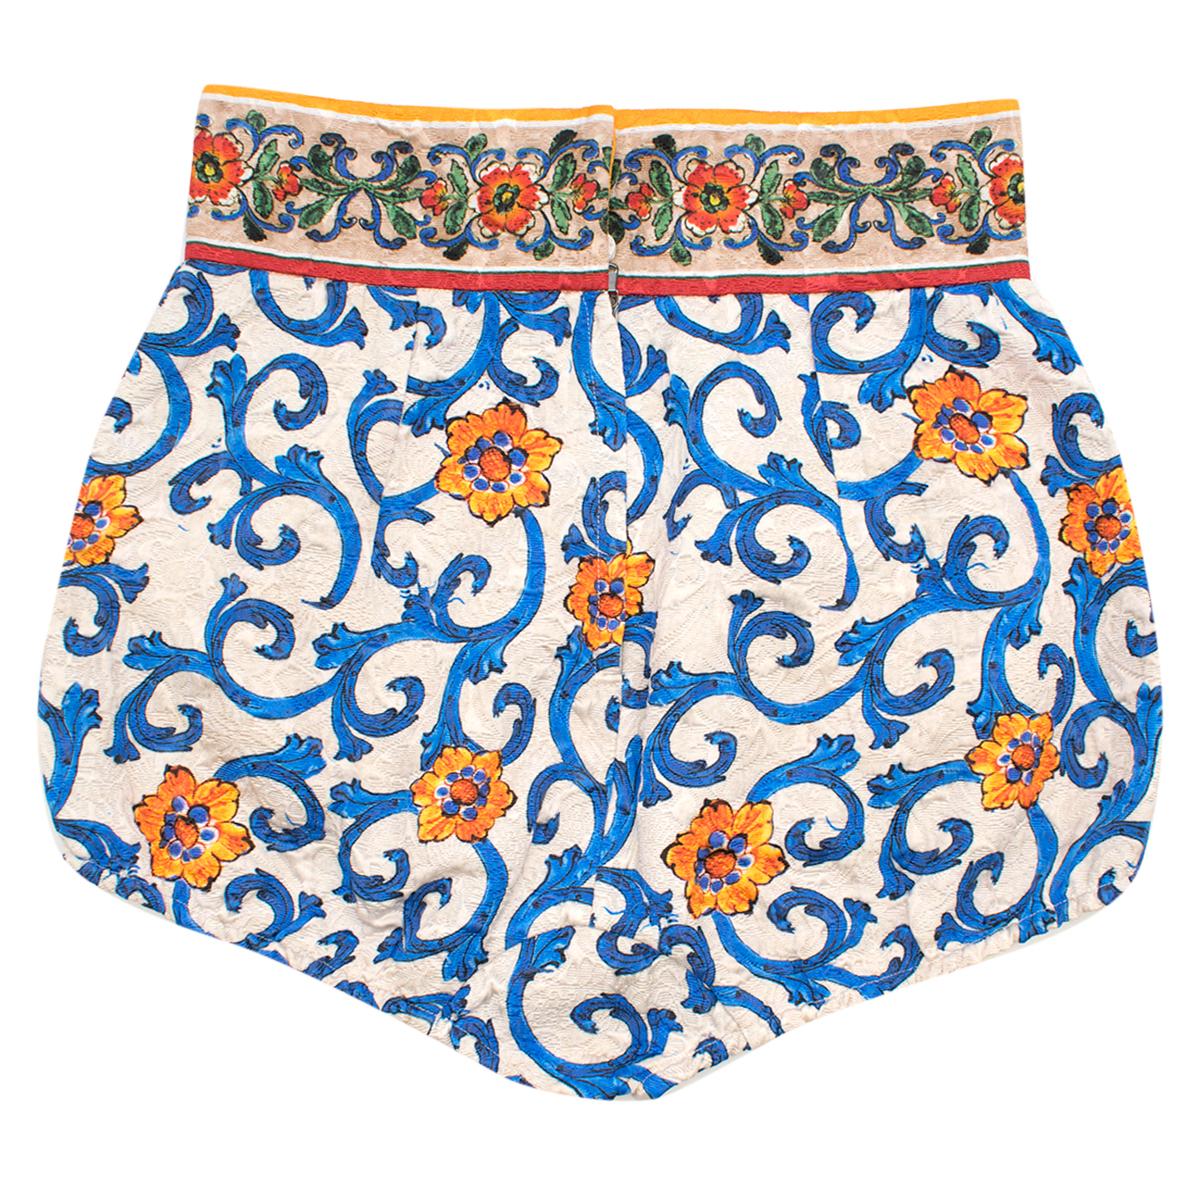 Dolce & Gabbana Majolica Print High Waisted Shorts

- Majolica print shorts 
- Very high waisted
- Push buttons and zip fastening to the back

Please note, these items are pre-owned and may show some signs of storage, even when unworn and unused.